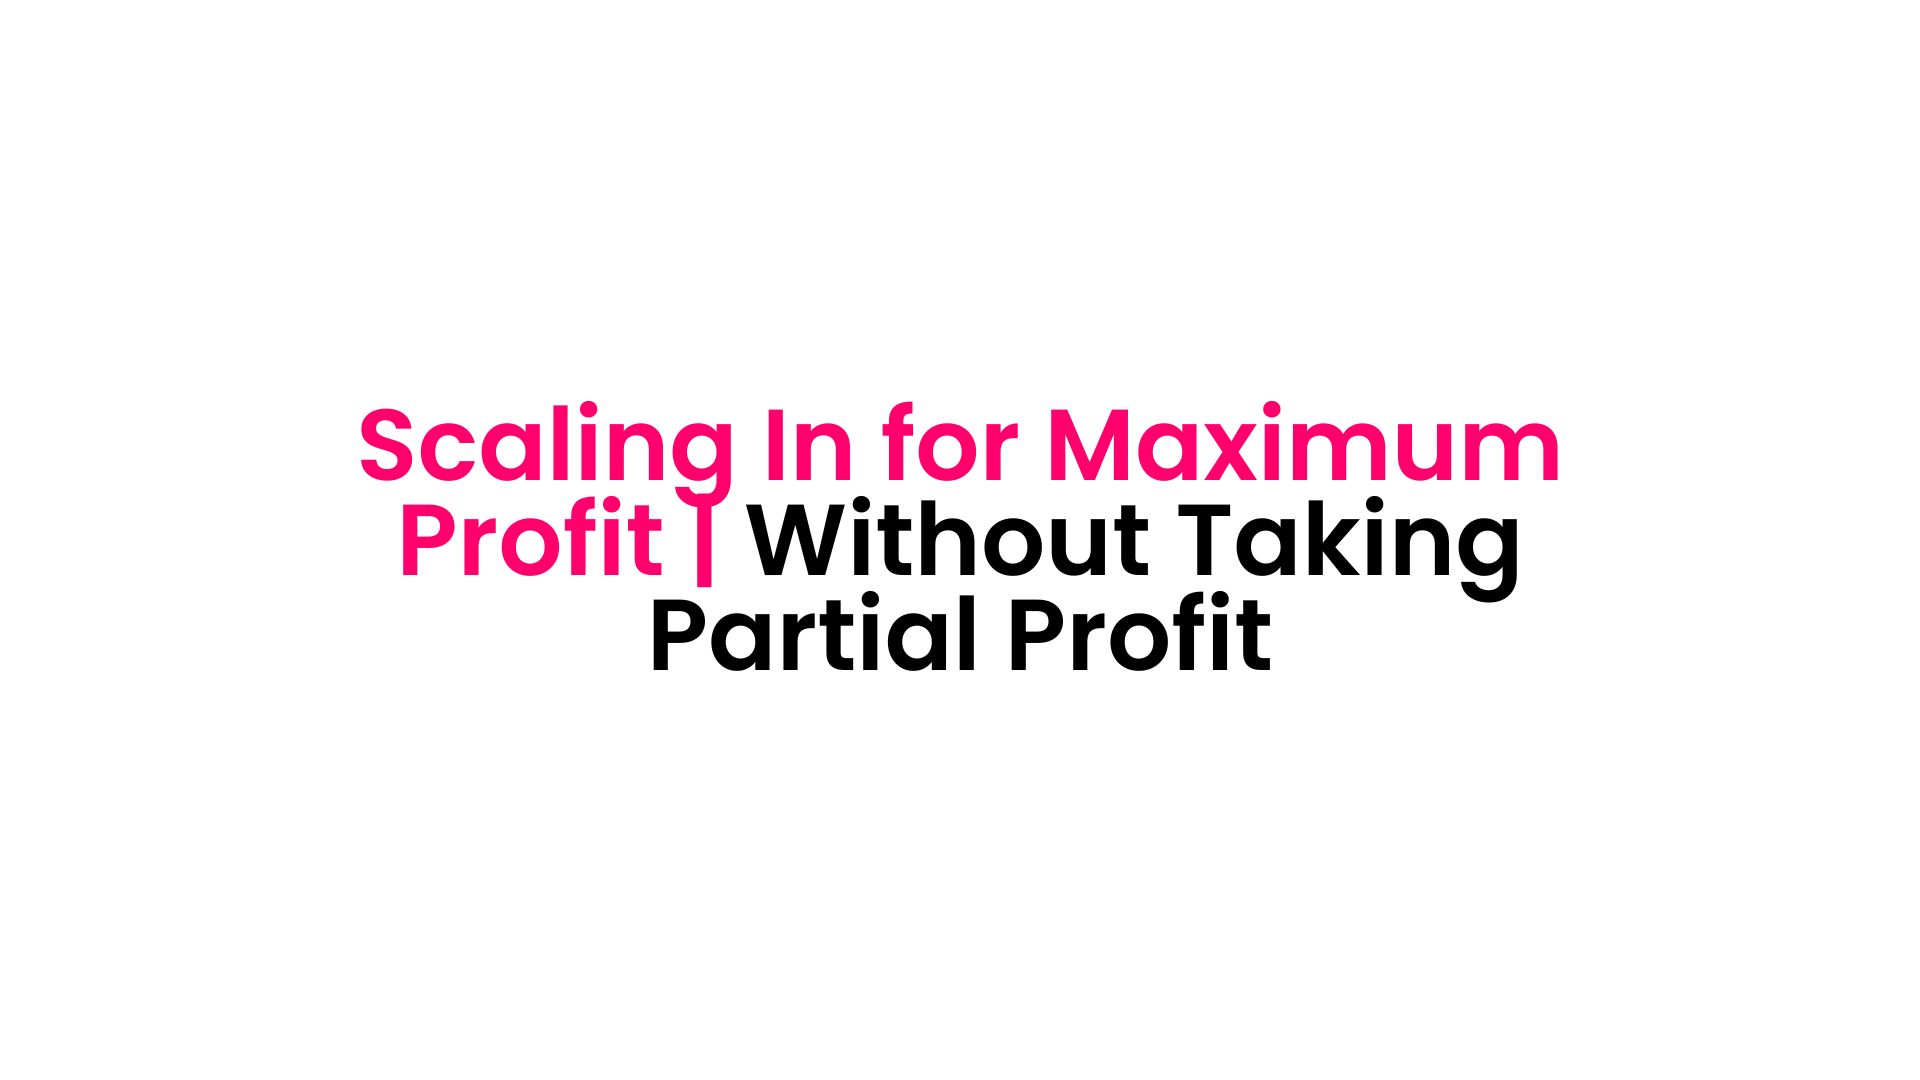 Scaling In for Maximum Profit Without Taking Partial Profit